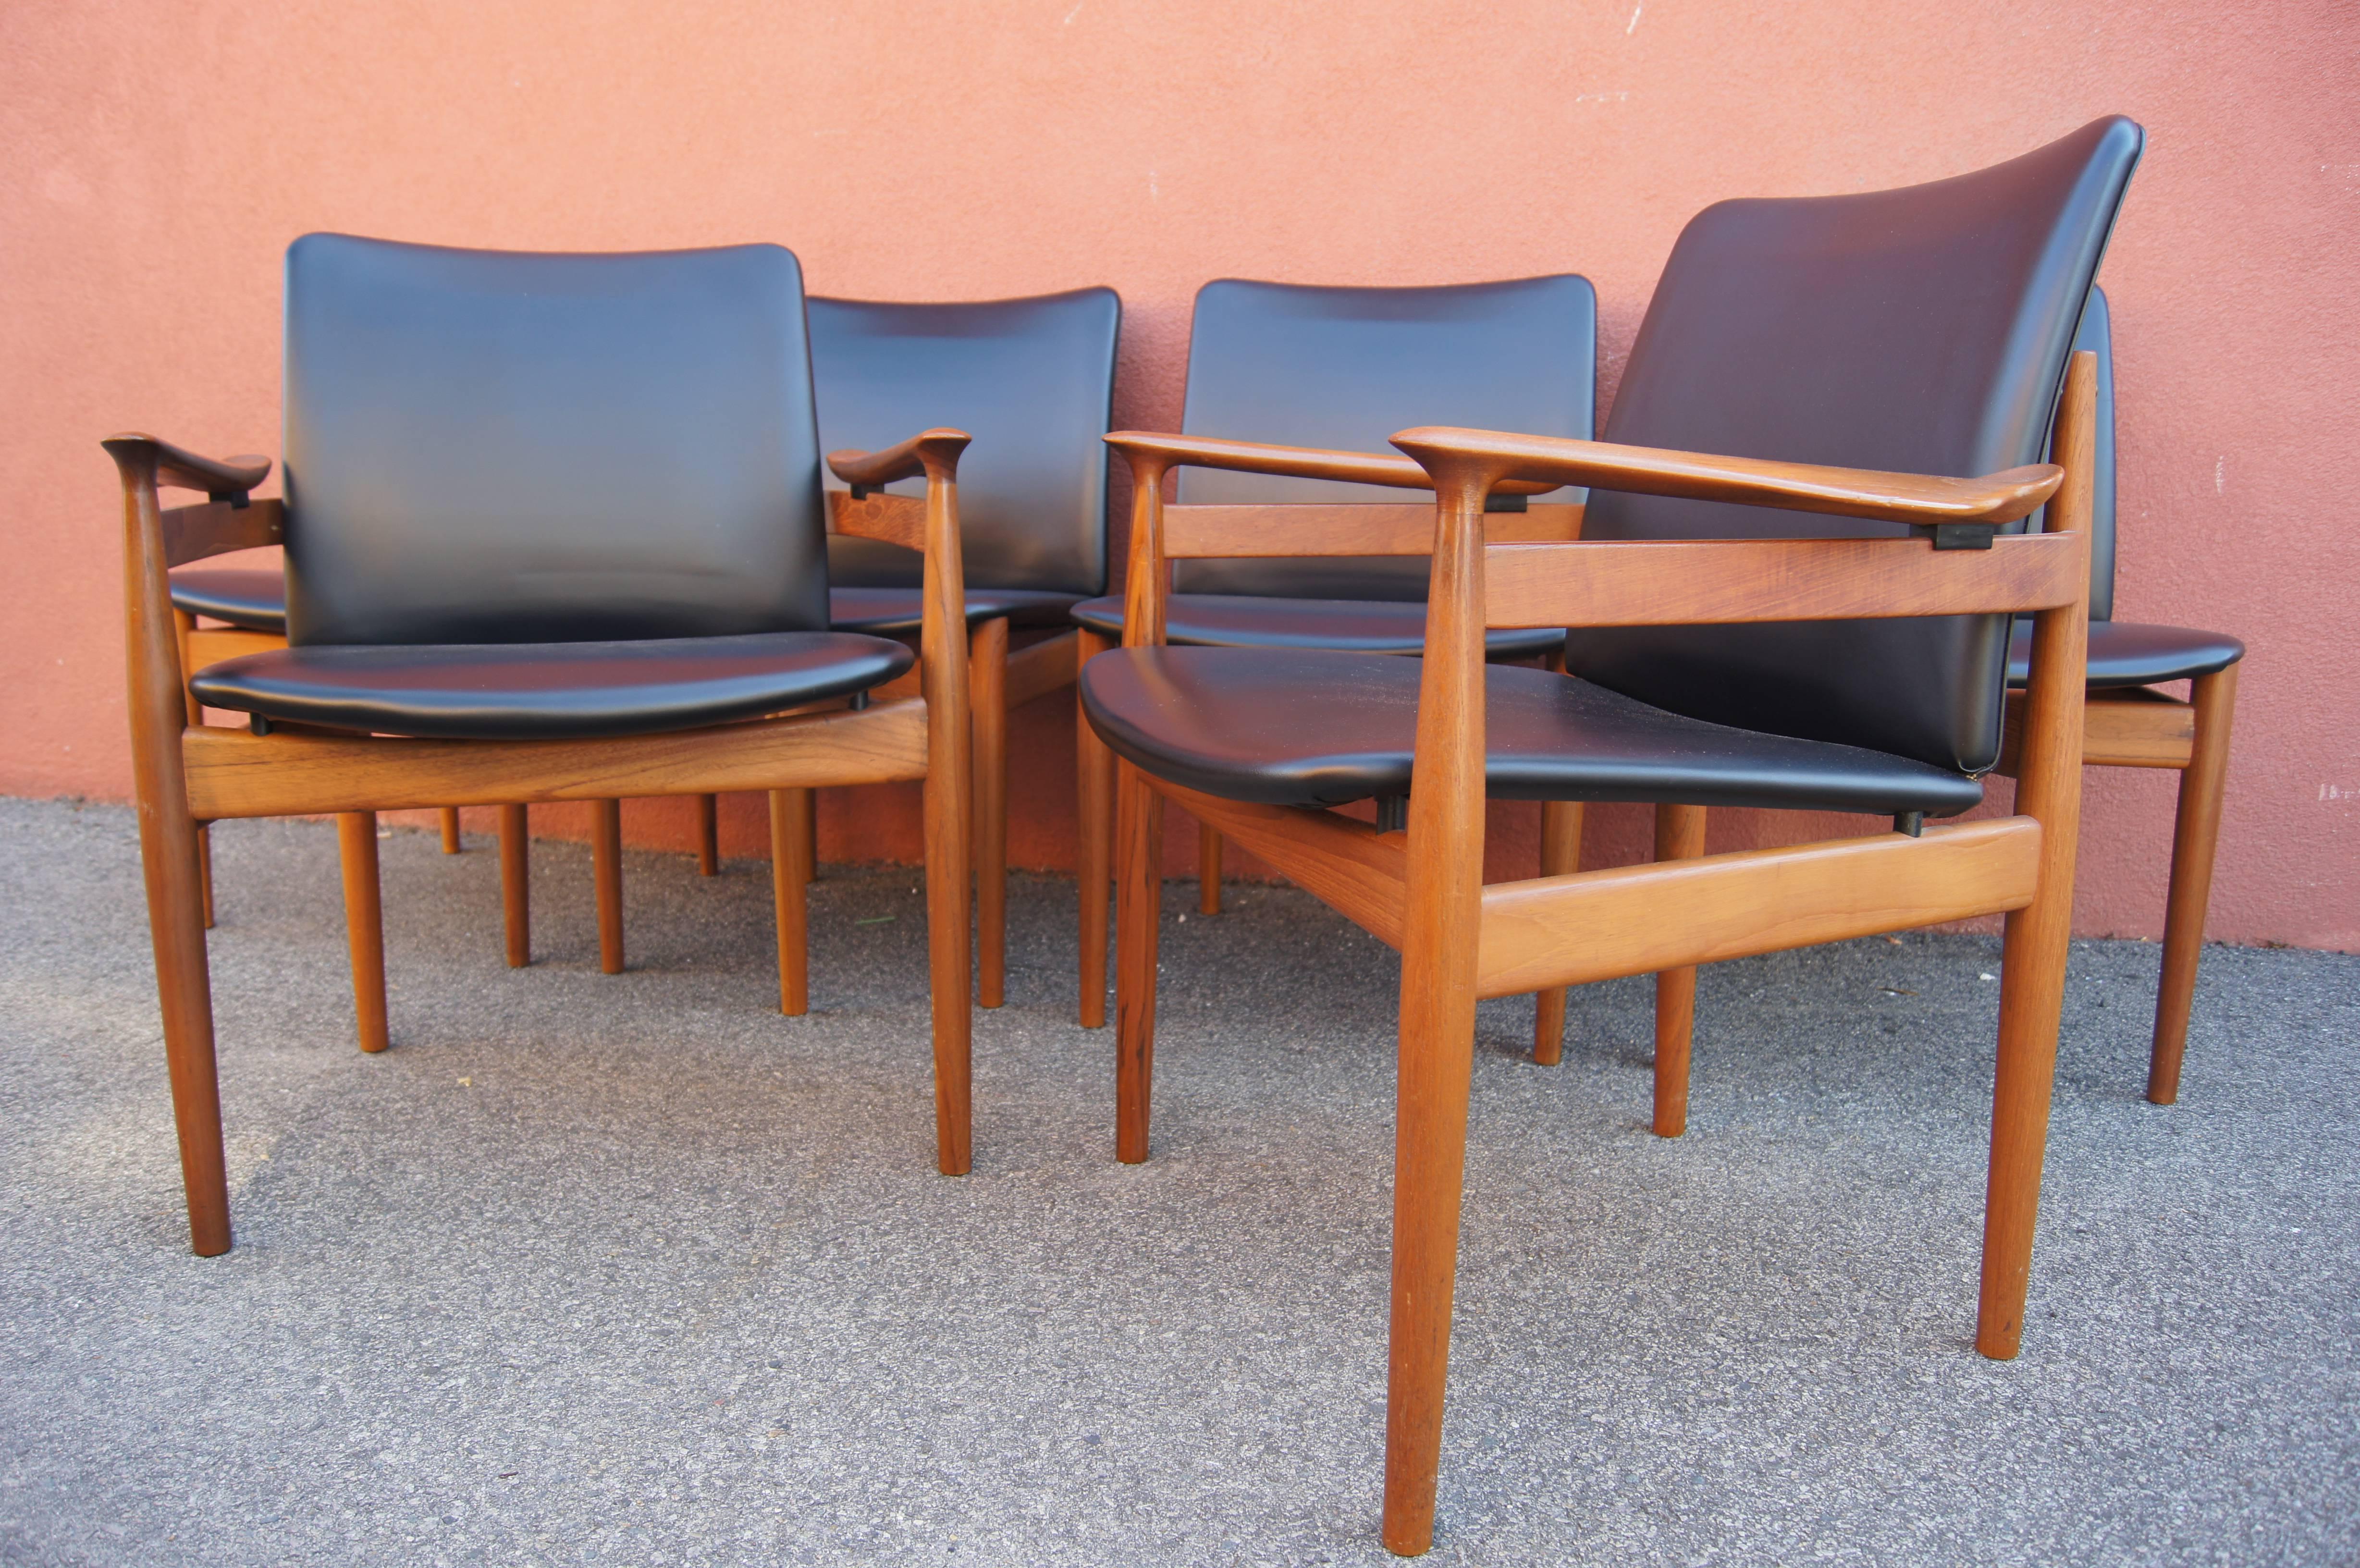 Set of Six Teak Dining Chairs, Models 191 & 192, by Finn Juhl In Good Condition For Sale In Dorchester, MA